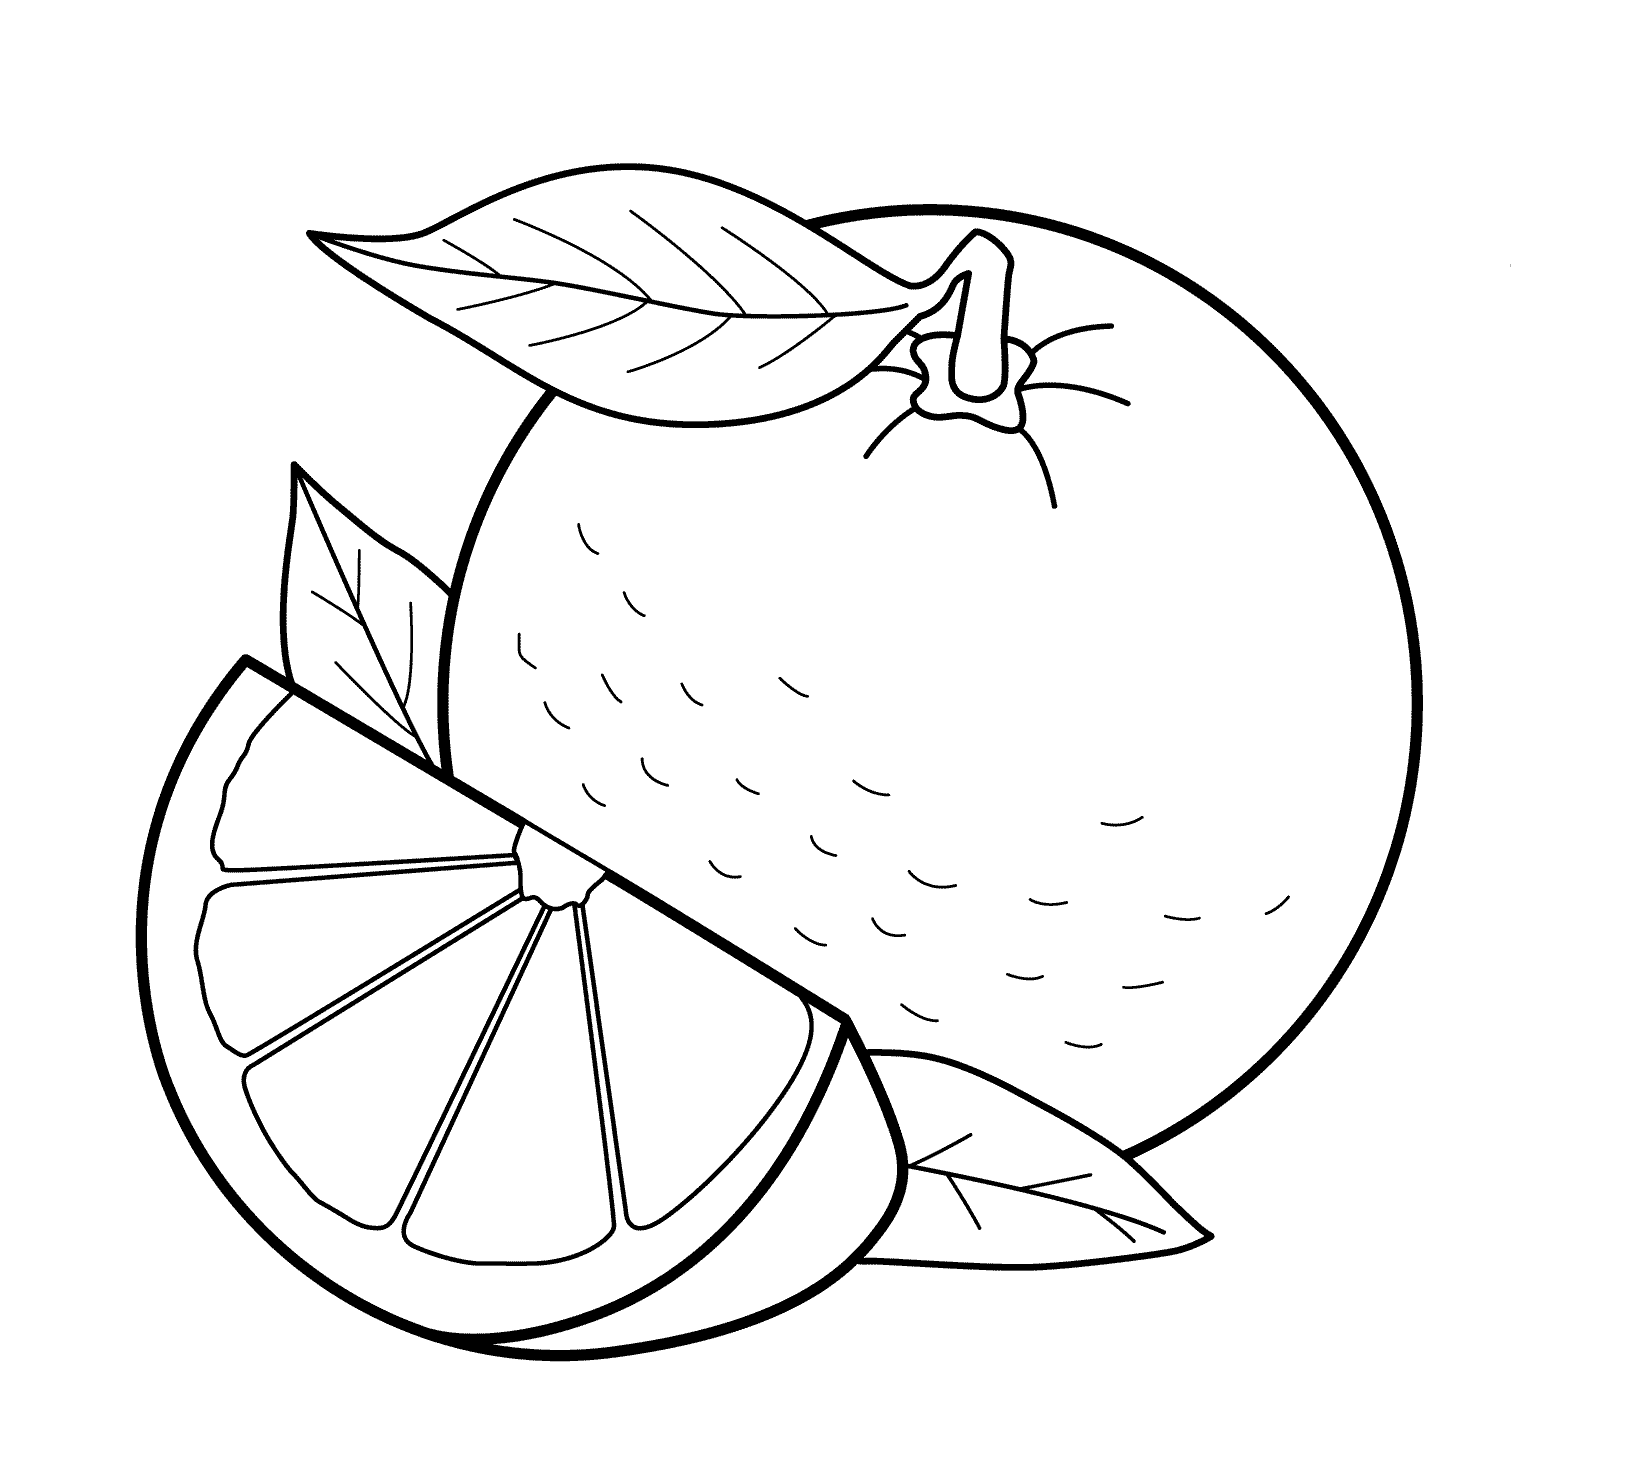 fruit images to color free printable fruit coloring pages for kids to color fruit images 